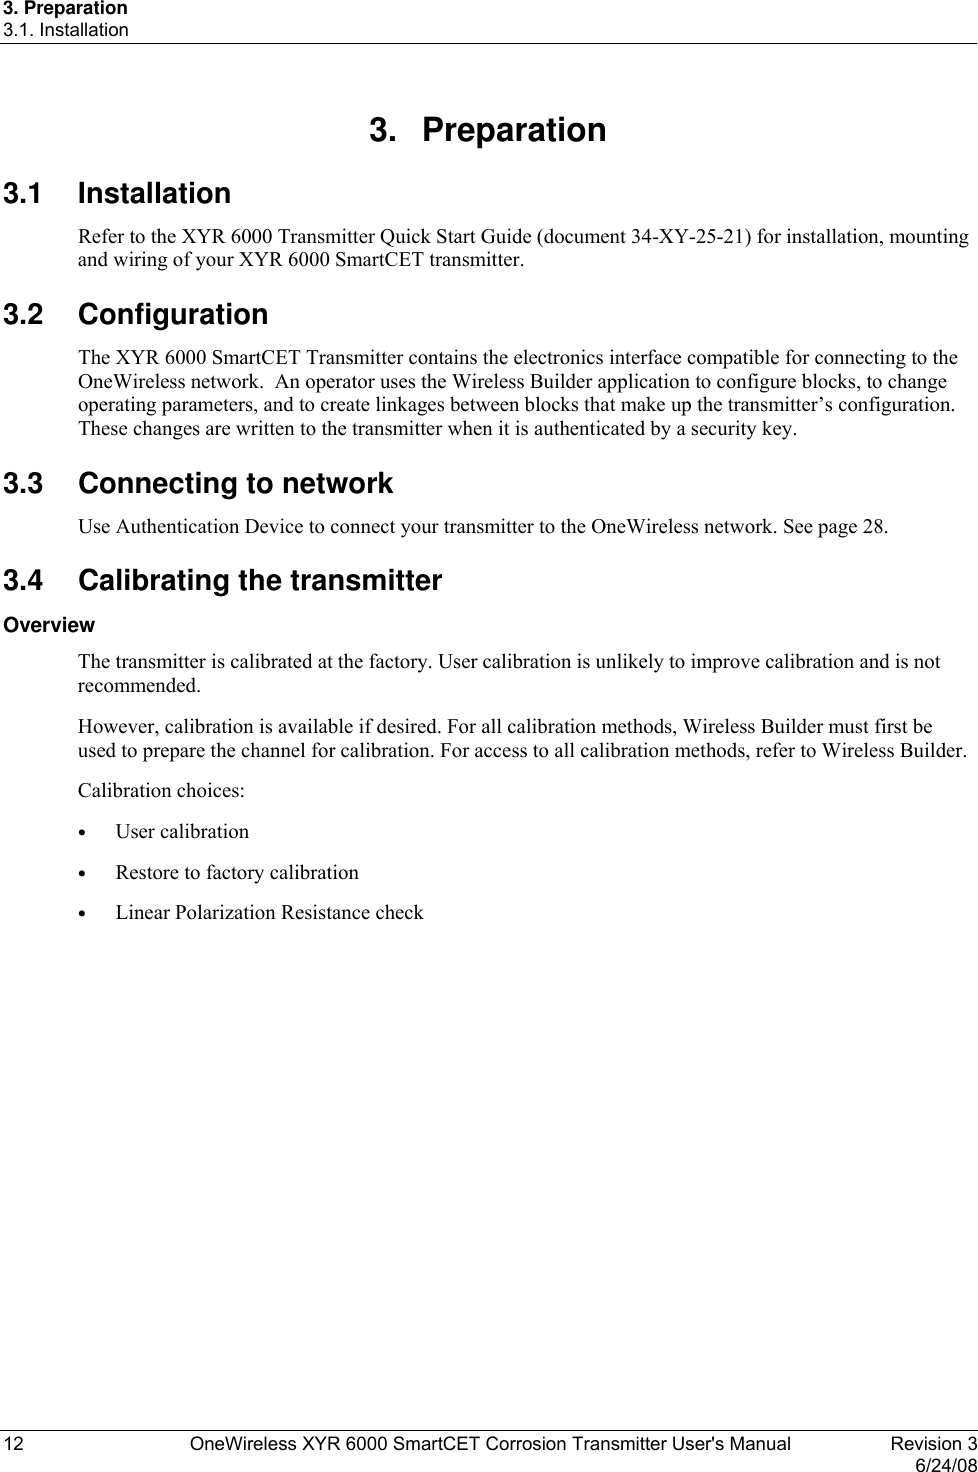 3. Preparation 3.1. Installation 12  OneWireless XYR 6000 SmartCET Corrosion Transmitter User&apos;s Manual   Revision 3   6/24/08 3. Preparation 3.1 Installation Refer to the XYR 6000 Transmitter Quick Start Guide (document 34-XY-25-21) for installation, mounting and wiring of your XYR 6000 SmartCET transmitter. 3.2 Configuration The XYR 6000 SmartCET Transmitter contains the electronics interface compatible for connecting to the OneWireless network.  An operator uses the Wireless Builder application to configure blocks, to change operating parameters, and to create linkages between blocks that make up the transmitter’s configuration.  These changes are written to the transmitter when it is authenticated by a security key. 3.3  Connecting to network Use Authentication Device to connect your transmitter to the OneWireless network. See page 28. 3.4  Calibrating the transmitter Overview The transmitter is calibrated at the factory. User calibration is unlikely to improve calibration and is not recommended.  However, calibration is available if desired. For all calibration methods, Wireless Builder must first be used to prepare the channel for calibration. For access to all calibration methods, refer to Wireless Builder. Calibration choices: •  User calibration •  Restore to factory calibration •  Linear Polarization Resistance check  